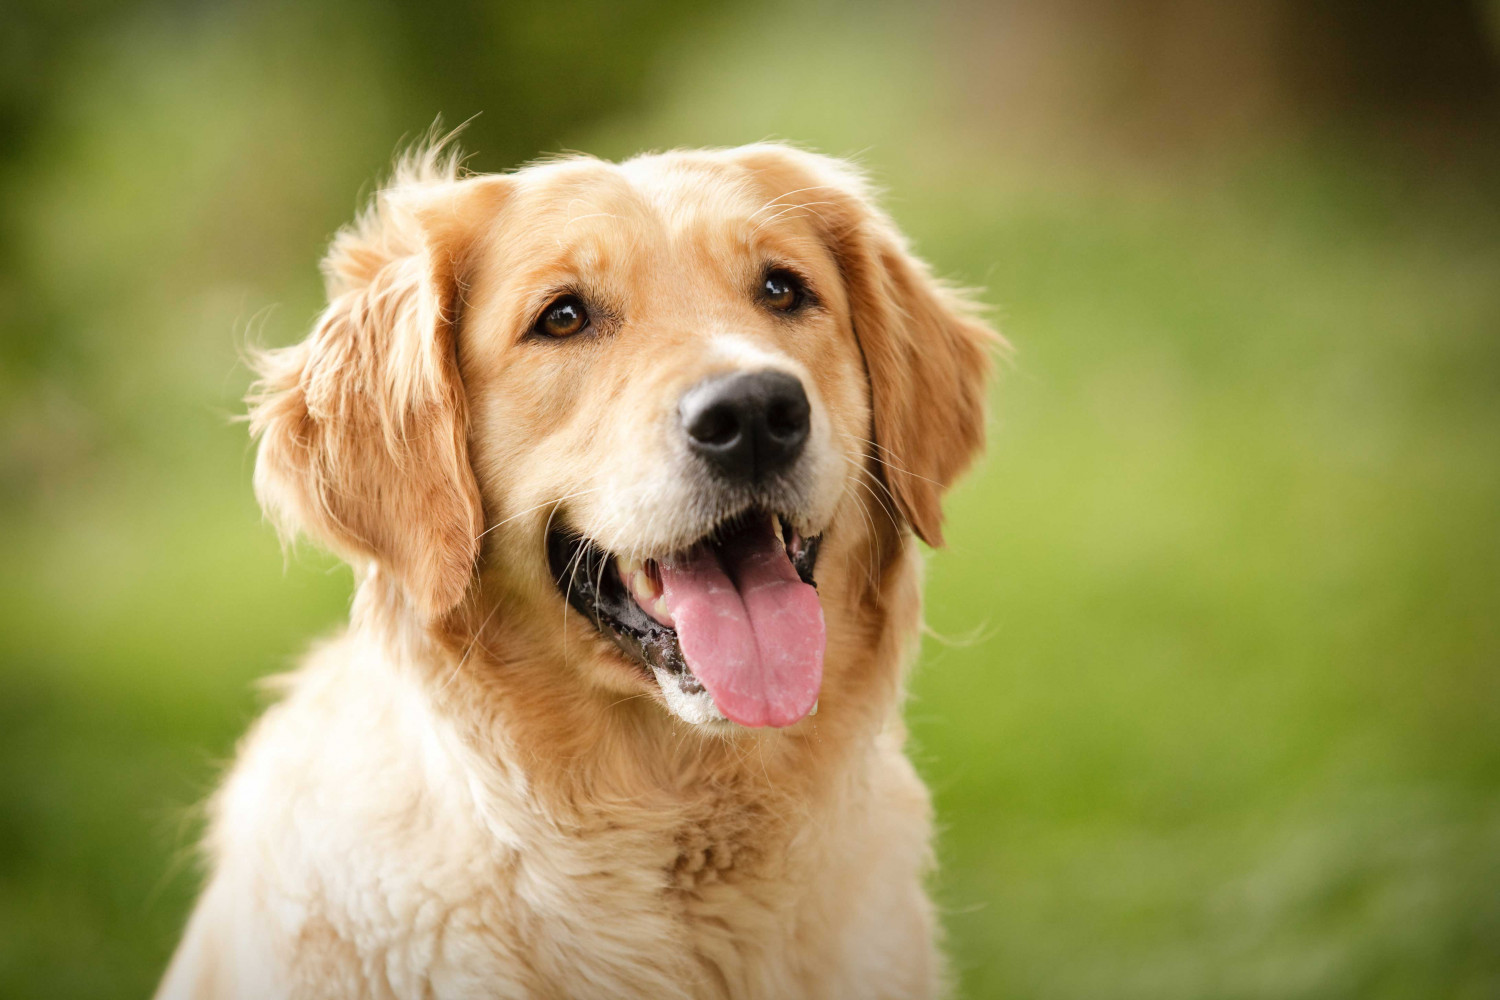 Golden Retriever Dog Breed Information, Images, Characteristics, Health